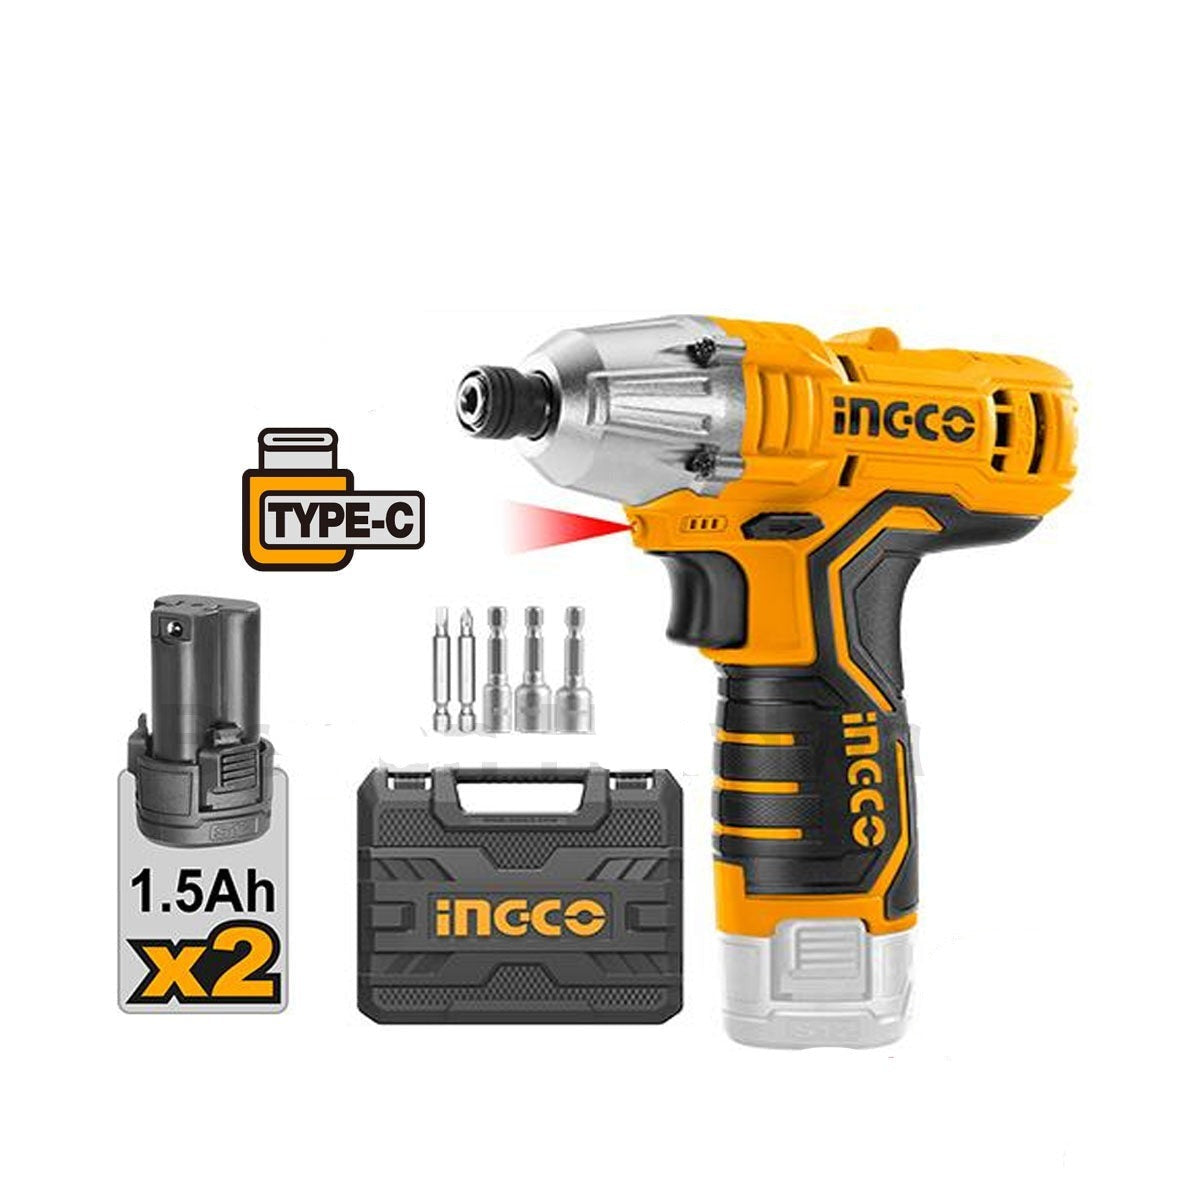 Ingco Lithium-Ion Cordless Impact Wrench - CIWLI2001 | Shop Online in Accra, Ghana - Supply Master Impact Wrench & Driver Buy Tools hardware Building materials